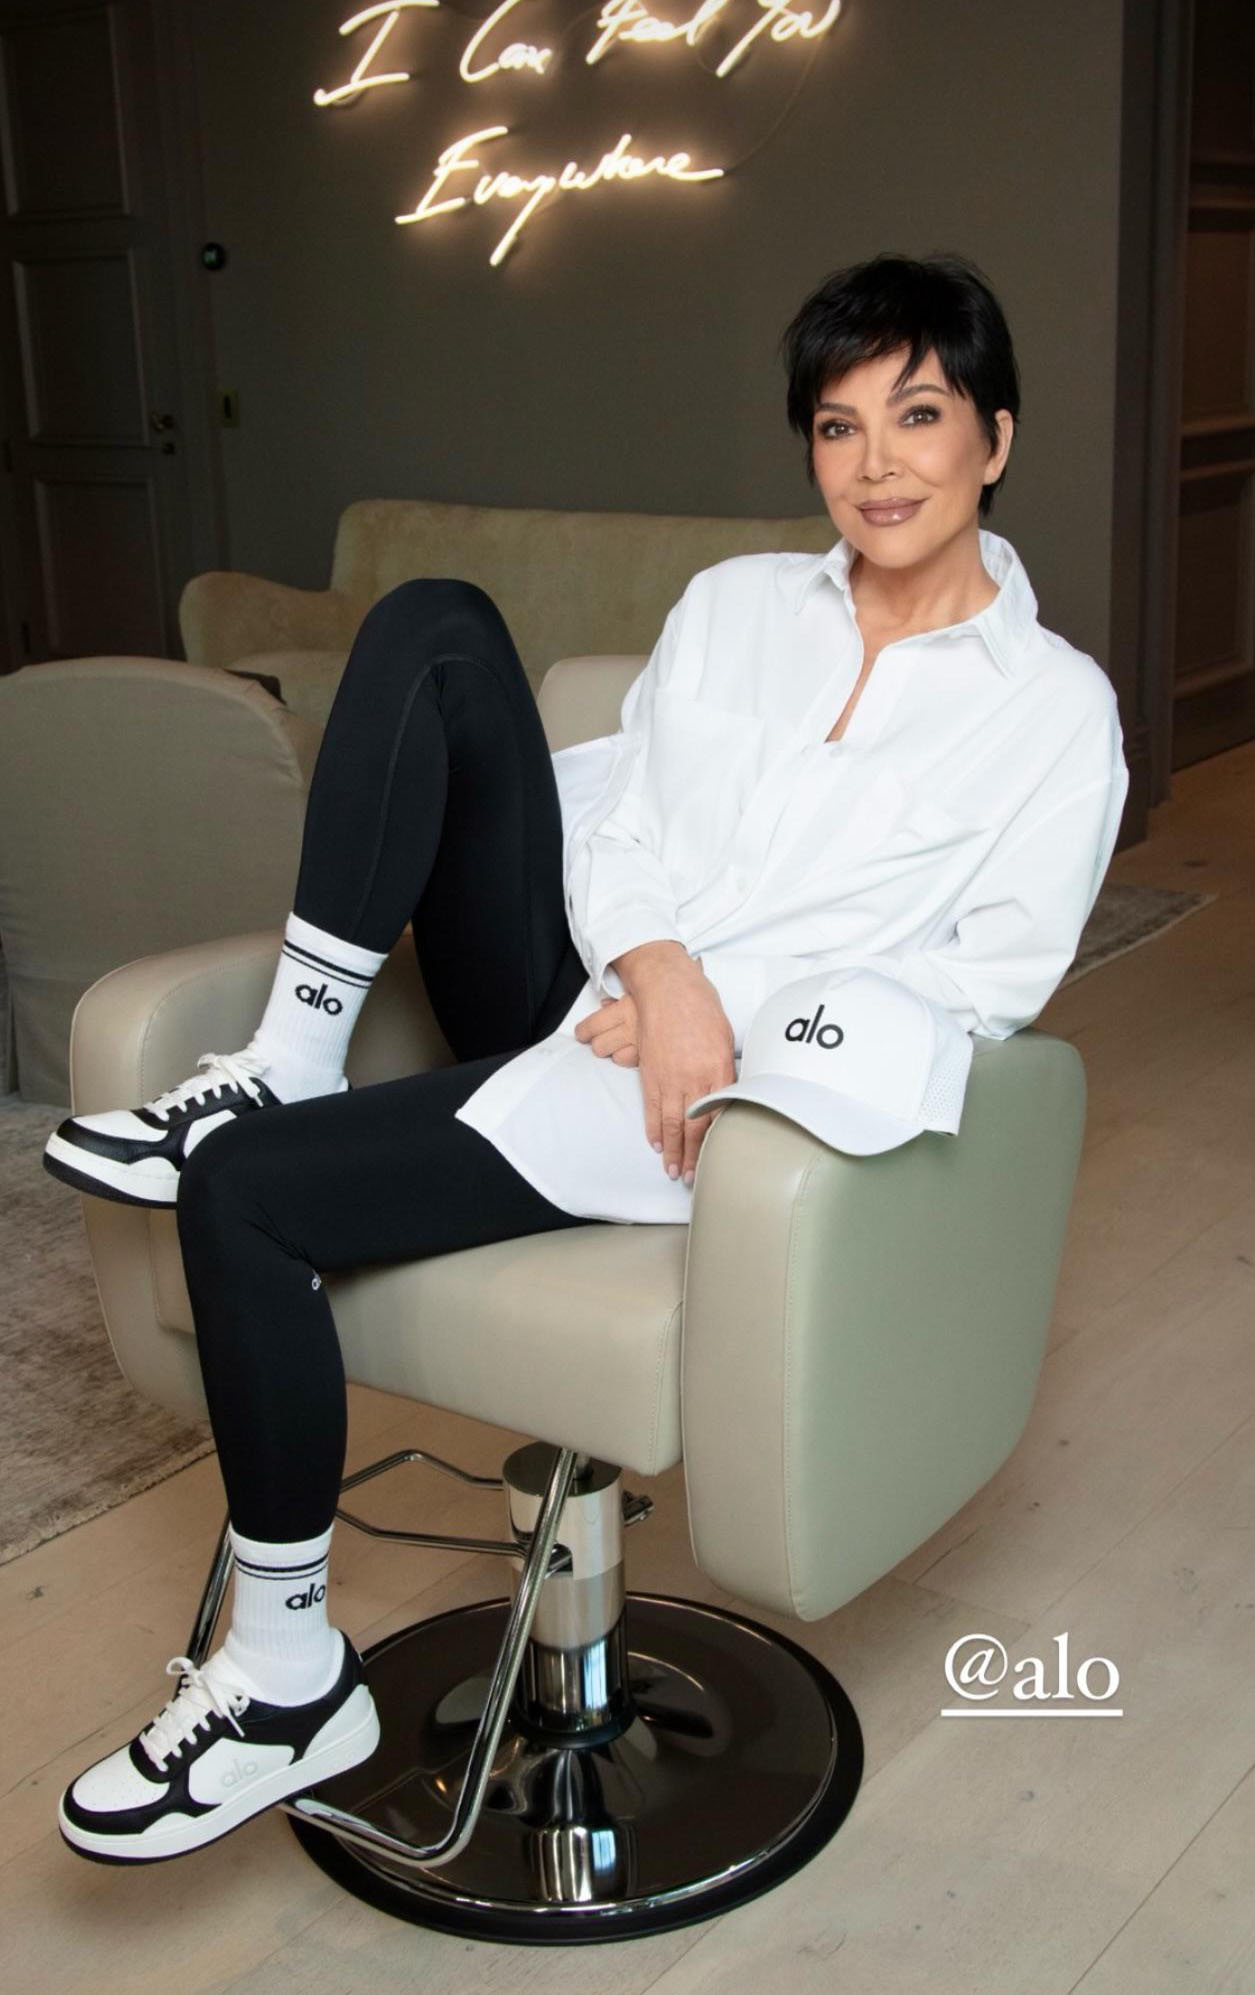 Kris looked lean in her Alo black leggings, and a loose-fitting white button-down shirt